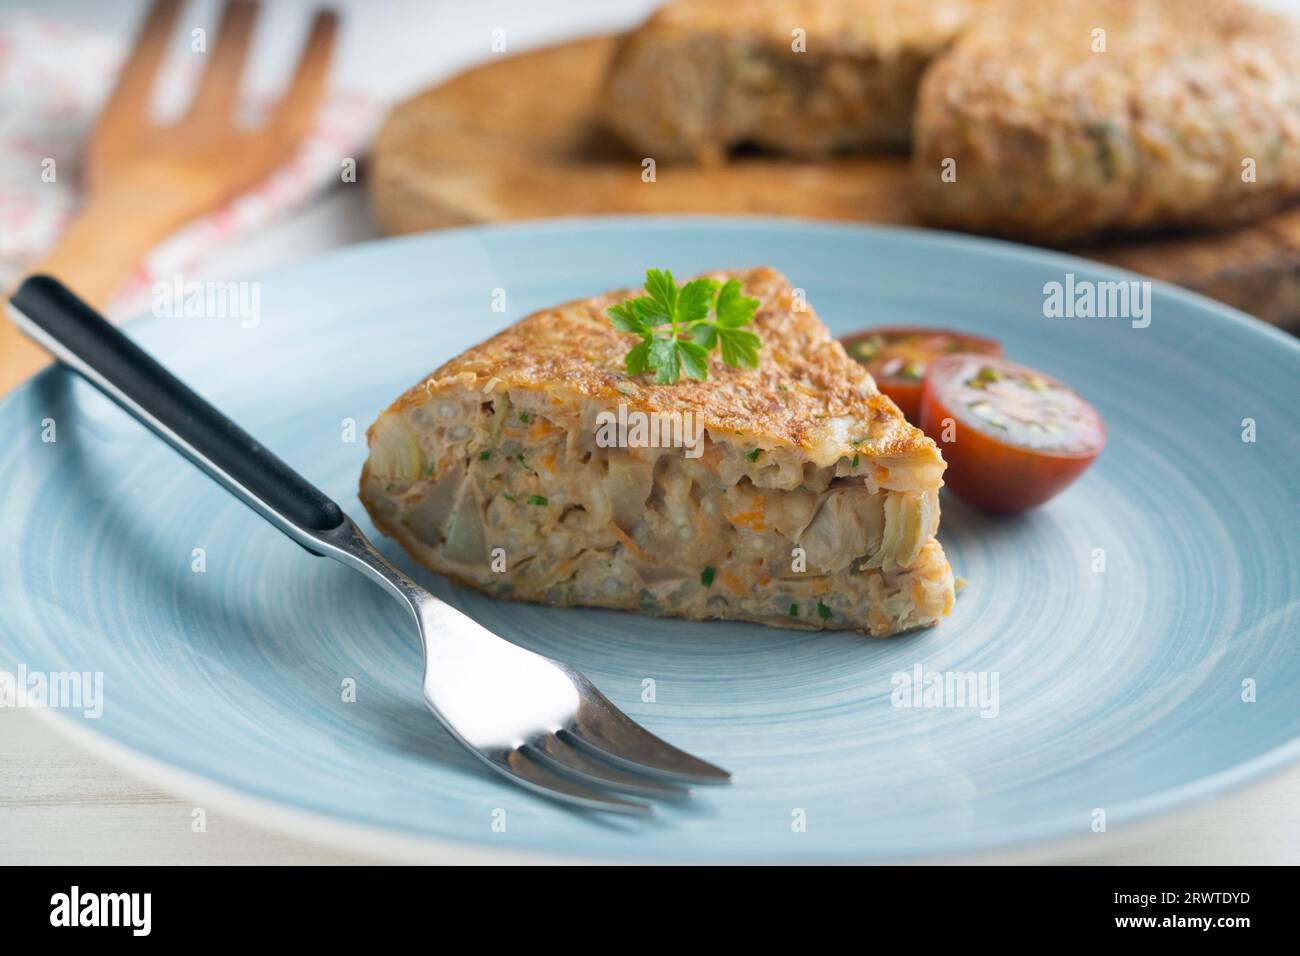 Spanish omelet made with rice and carrot and artichokes Stock Photo